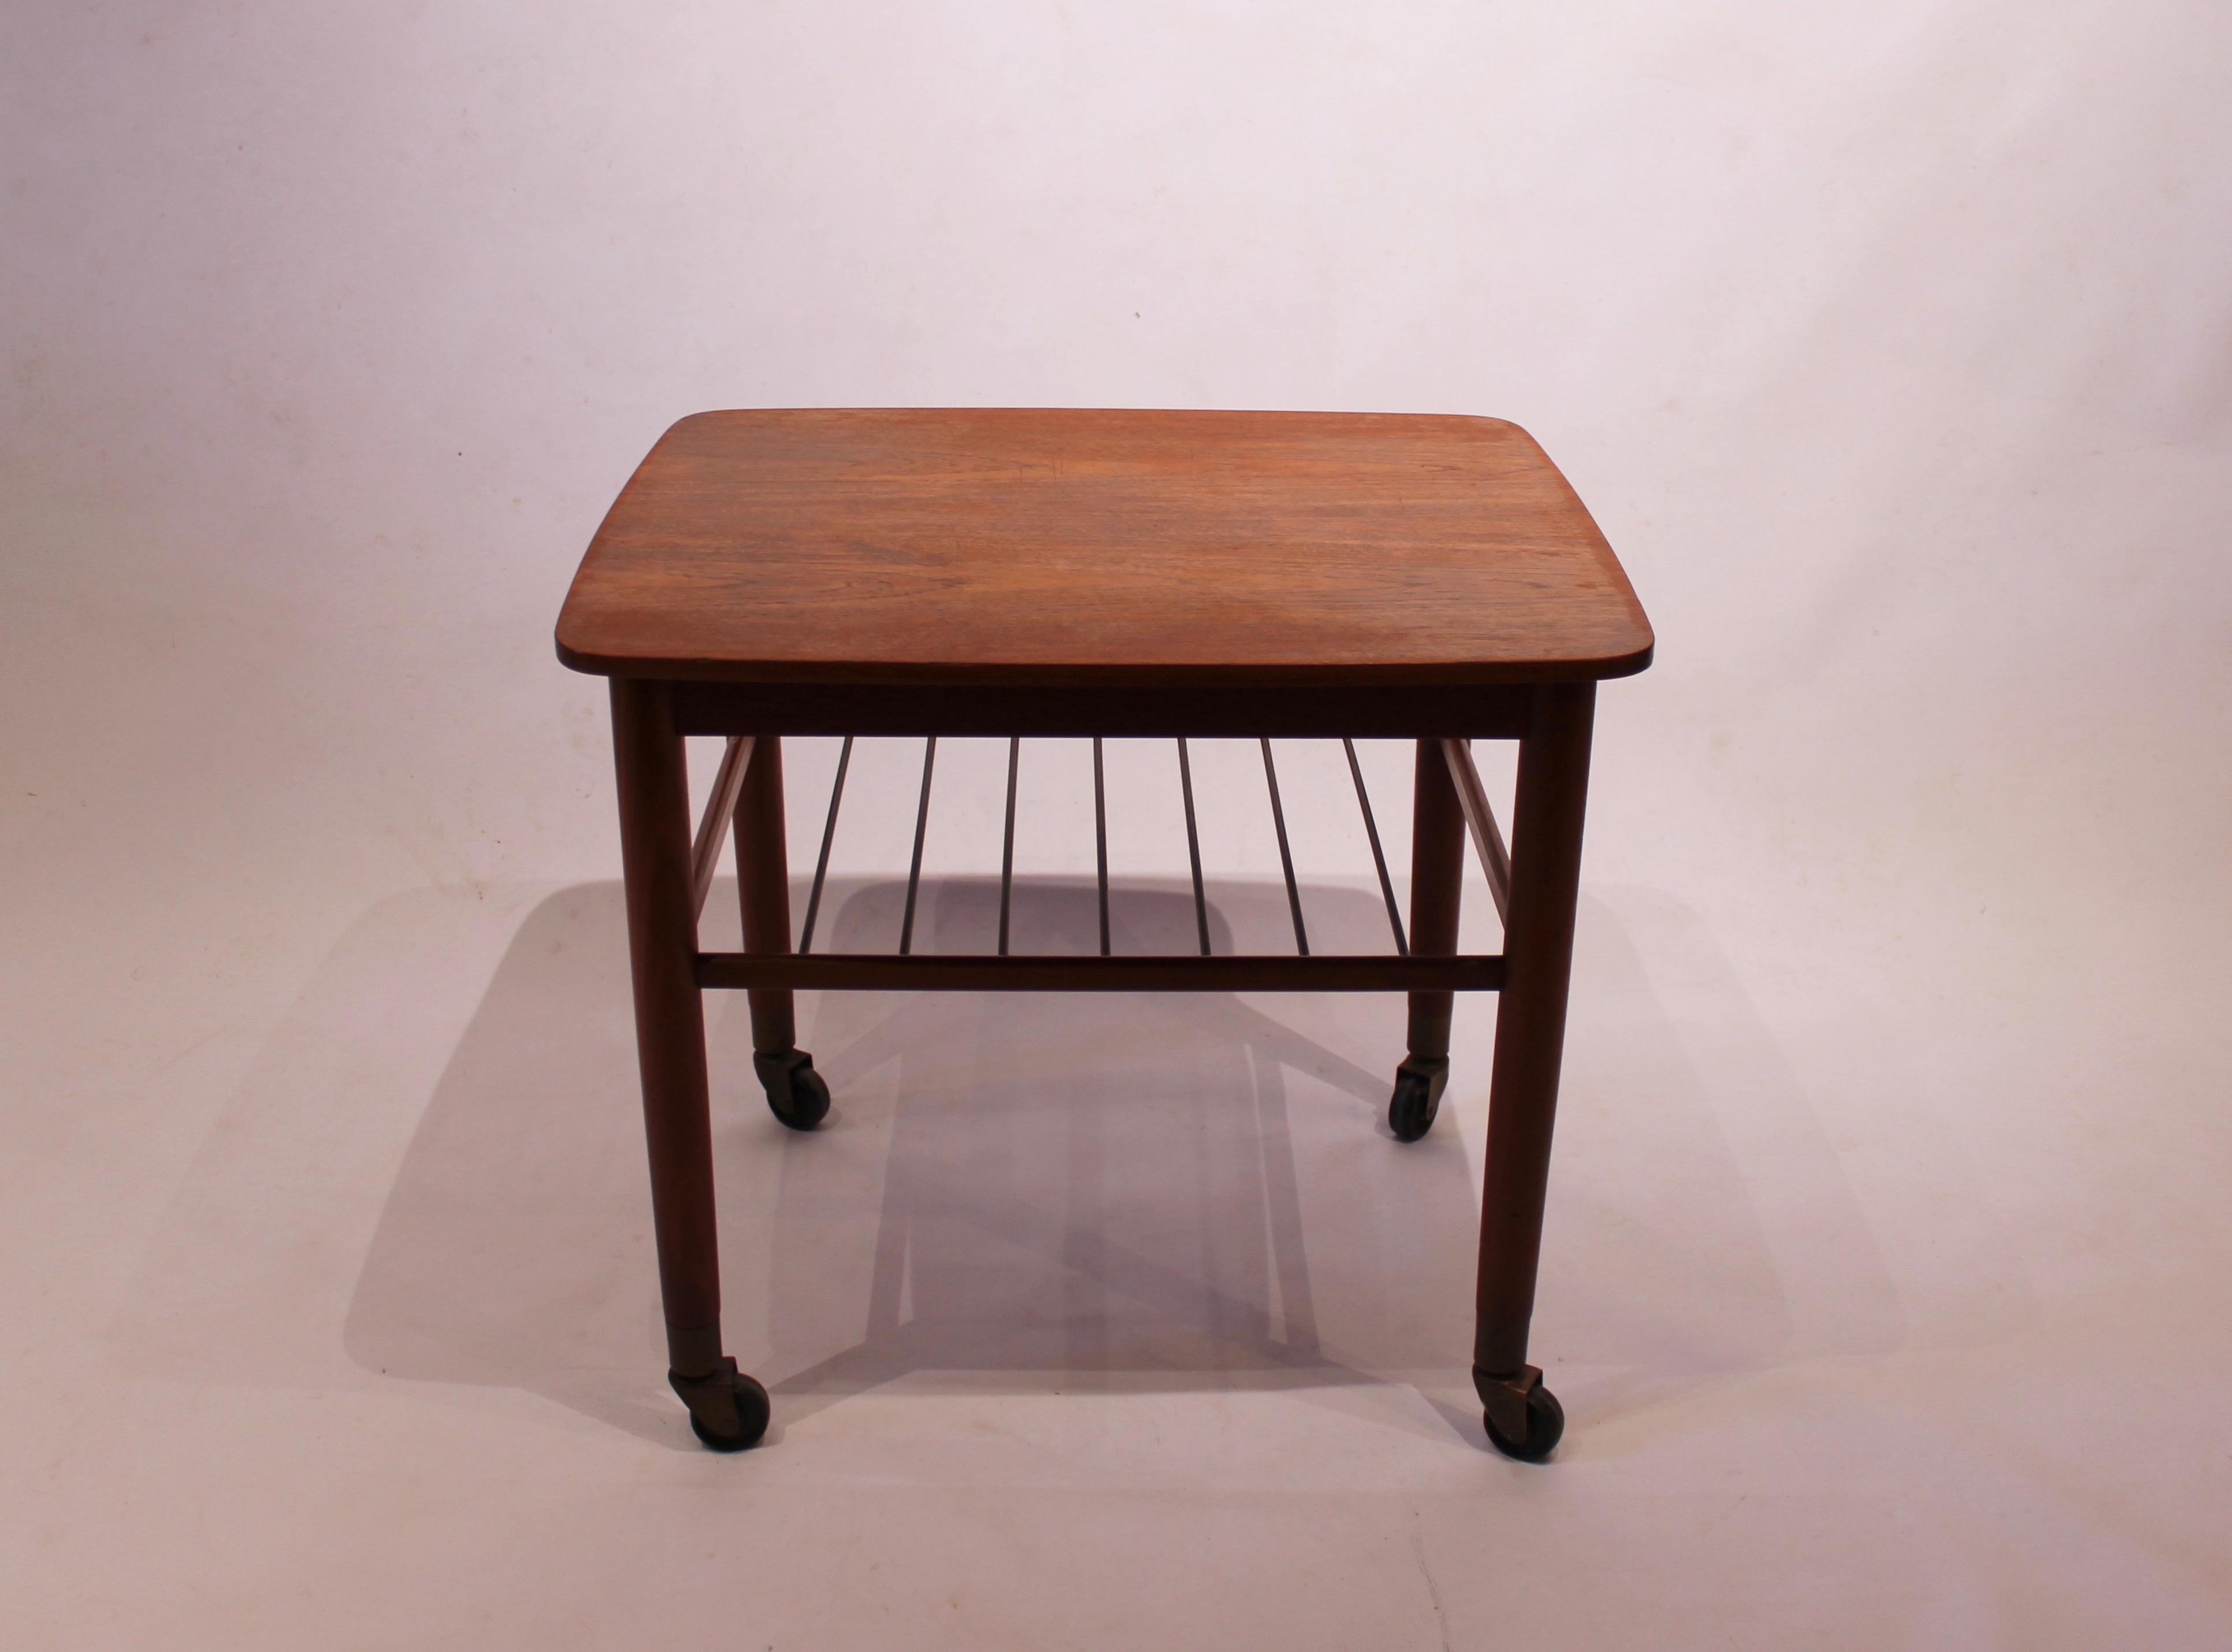 Side table on wheels with shelf of teak and of Danish design from the 1960s. The table is in great vintage condition.